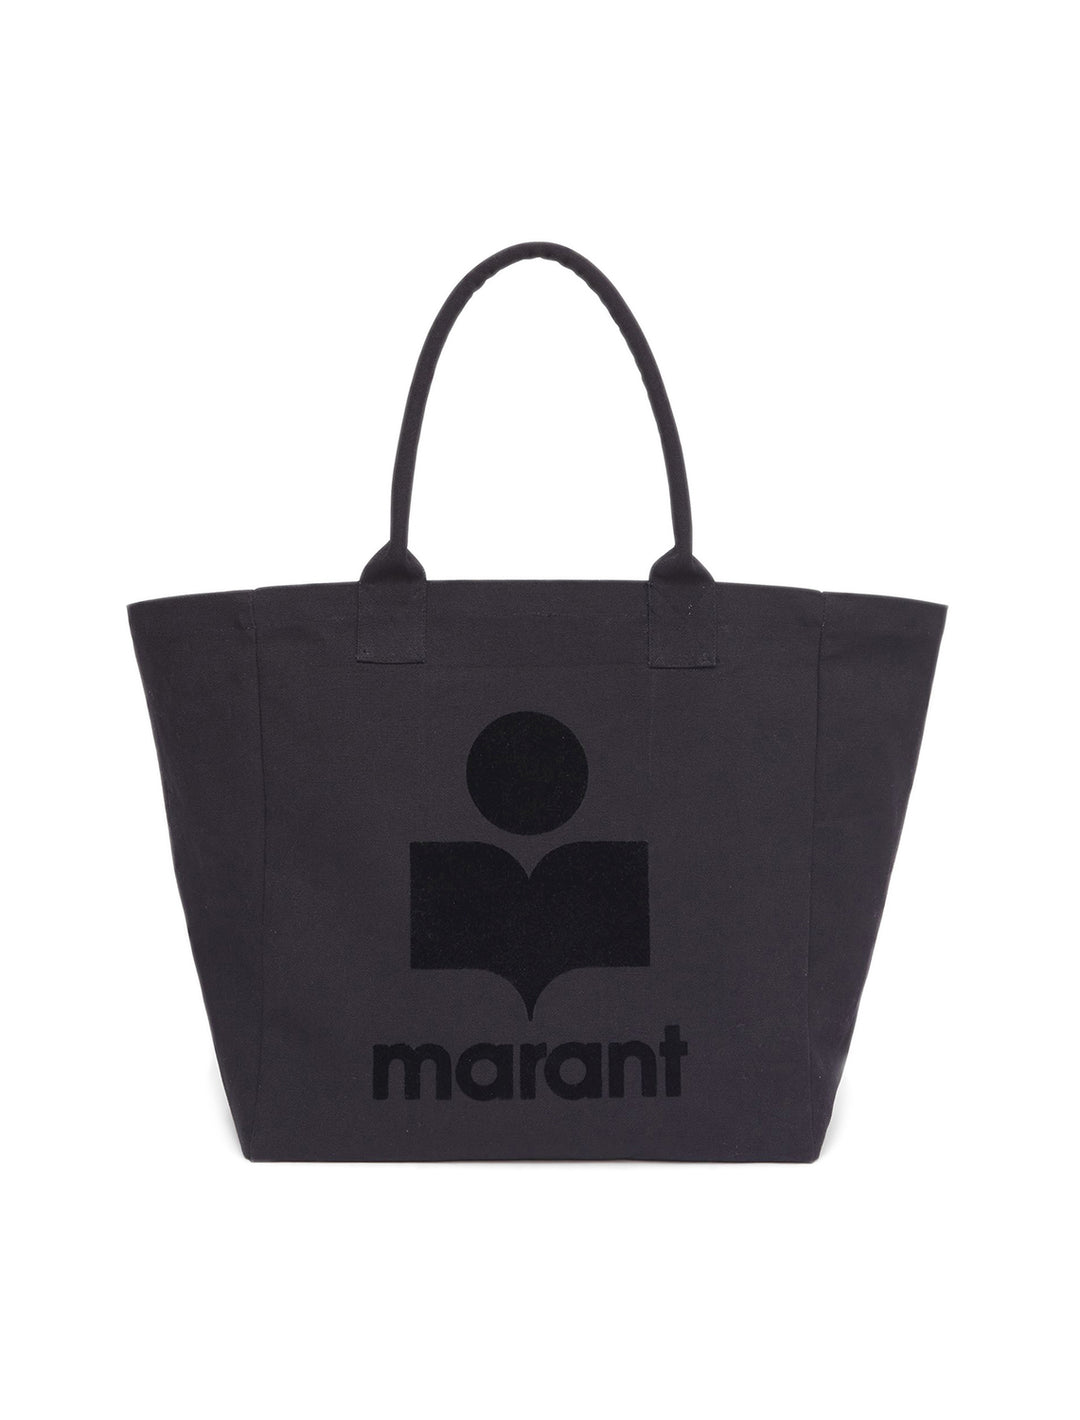 Front view of Isabel Marant Etoile's yenky tote in black with flocked logo.